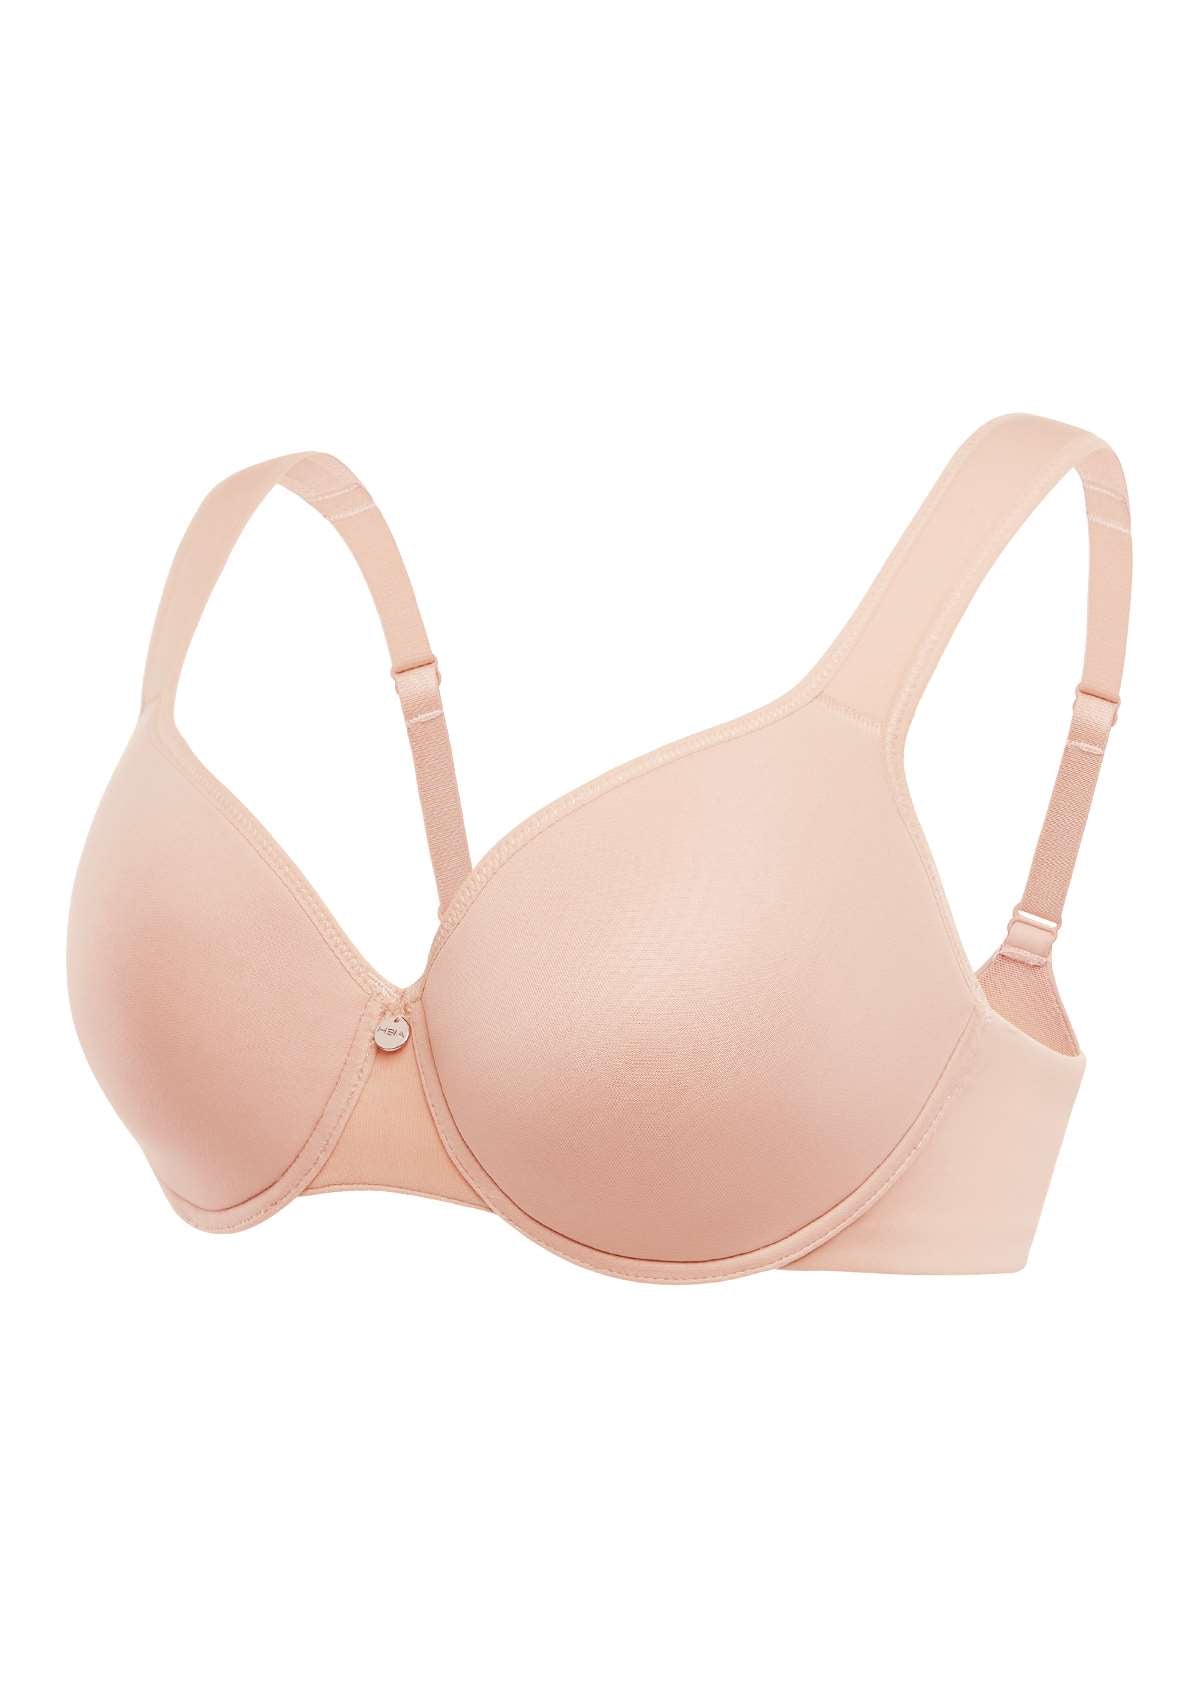 HSIA Patricia Smooth Classic T-shirt Lightly Padded Minimizer Bra - Light Pink / 42 / G